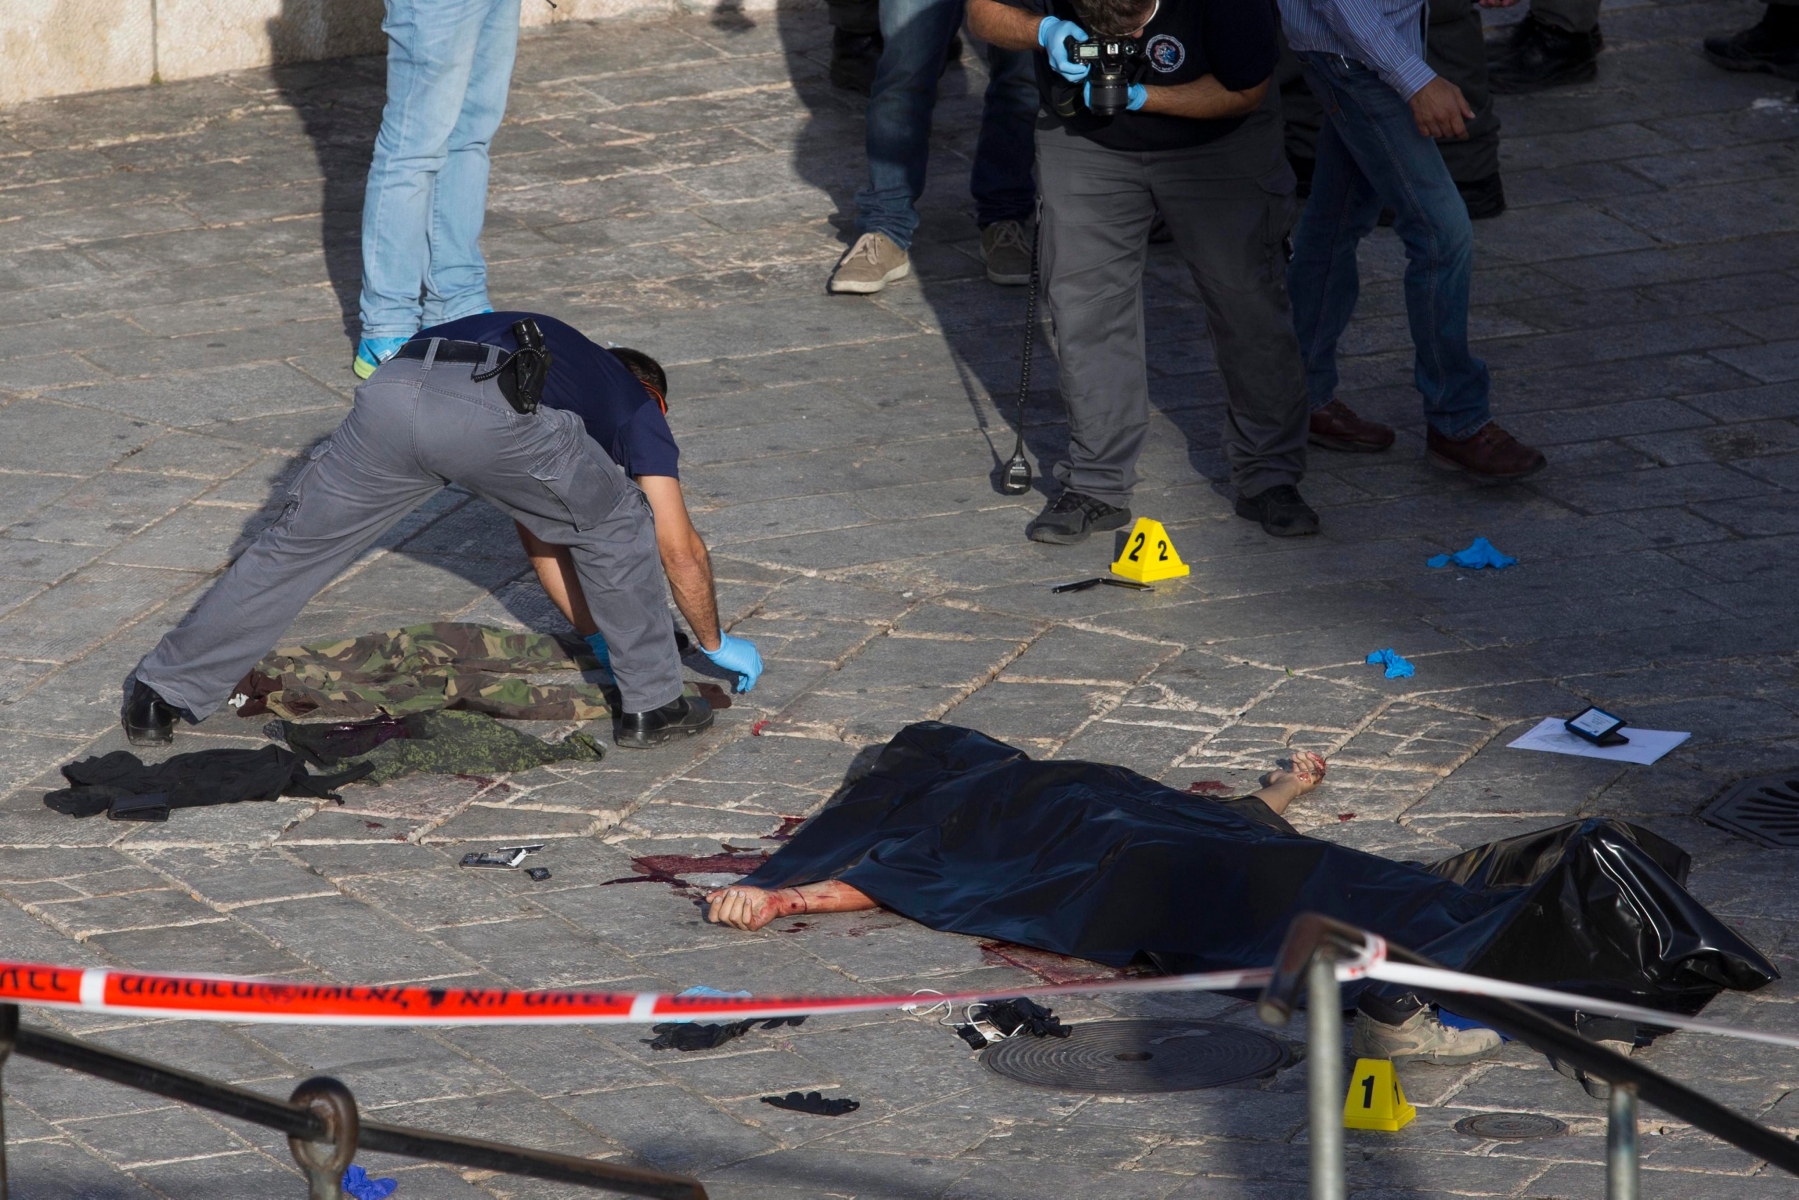 epa04977431 Israeli police work at the scene as emergency teams remove the body of a Palestinian man who was shot by the Israeli Police after he tried to stab them at the Damascus gate in the Old city of Jerusalem, Israel, 14 October 2015. According to media reports, hundreds of troops were being deployed in Israeli cities following a series of shooting and stabbing attacks by Palestinians.  EPA/ABIR SULTAN ATTENTION EDITORS: PICTURE CONTAINS GRAPHIC CONTENT ISRAEL PALESTINIAN CONFLICTS